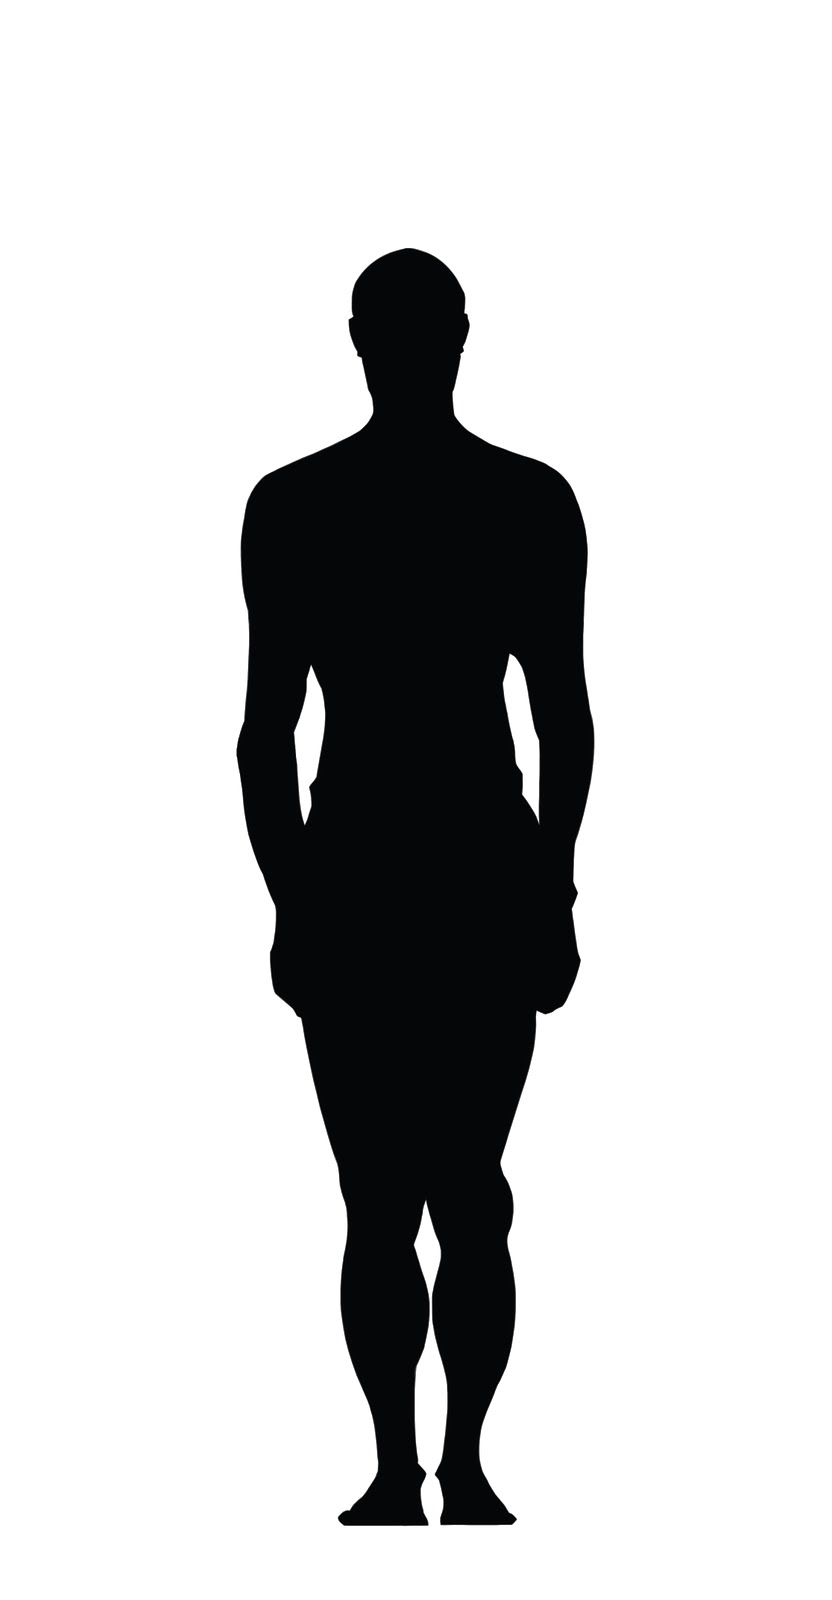 Human Body Silhouette - ClipArt Best